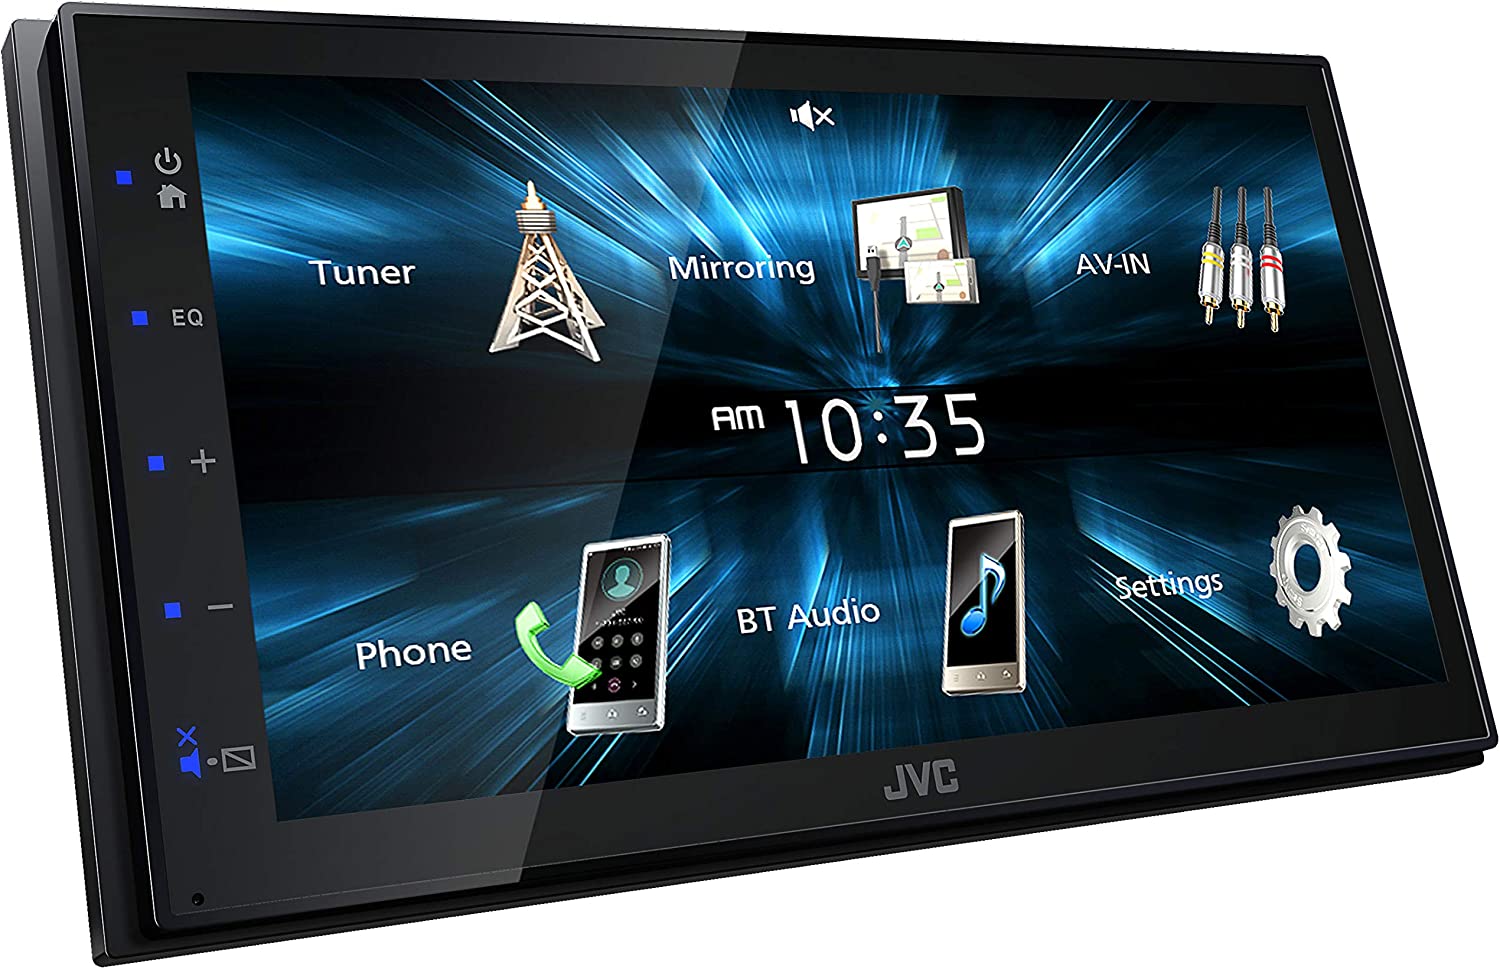 JVC KW-M150BT Bluetooth Car Stereo Receiver with USB Port 6.75" Display Radio MP3 Player Double DIN + Absolute CAM600 Camera